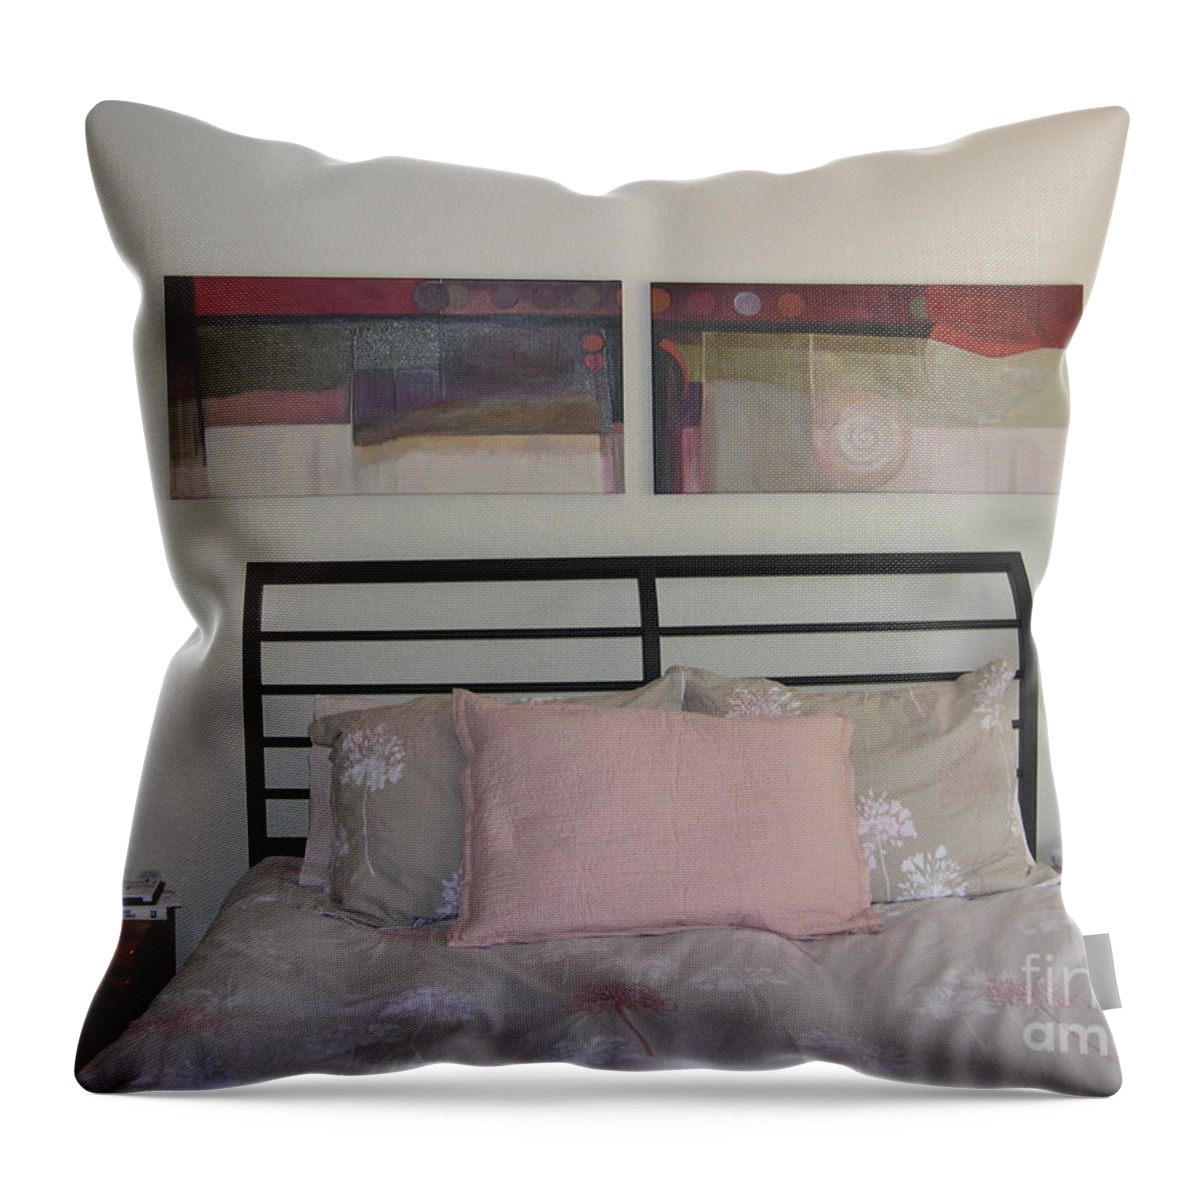  Throw Pillow featuring the mixed media Installation Duo by Marlene Burns